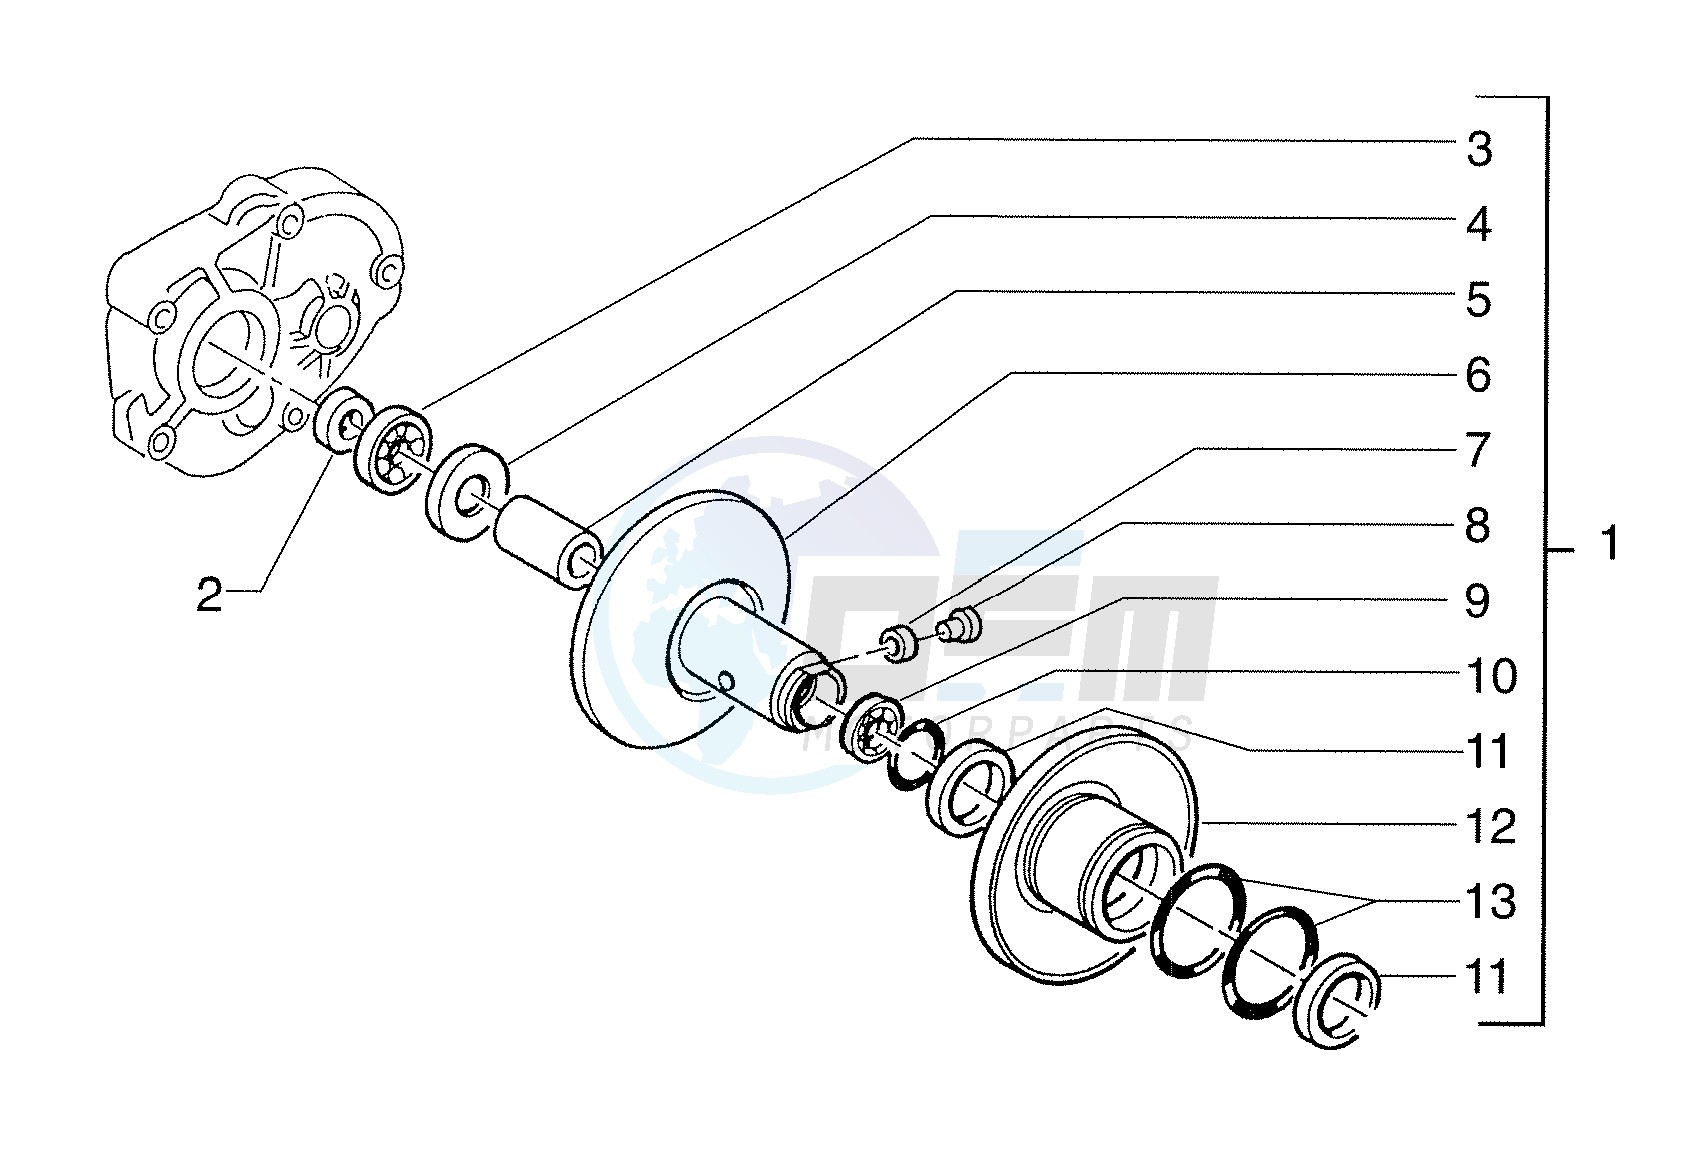 Fixed half-pulley image